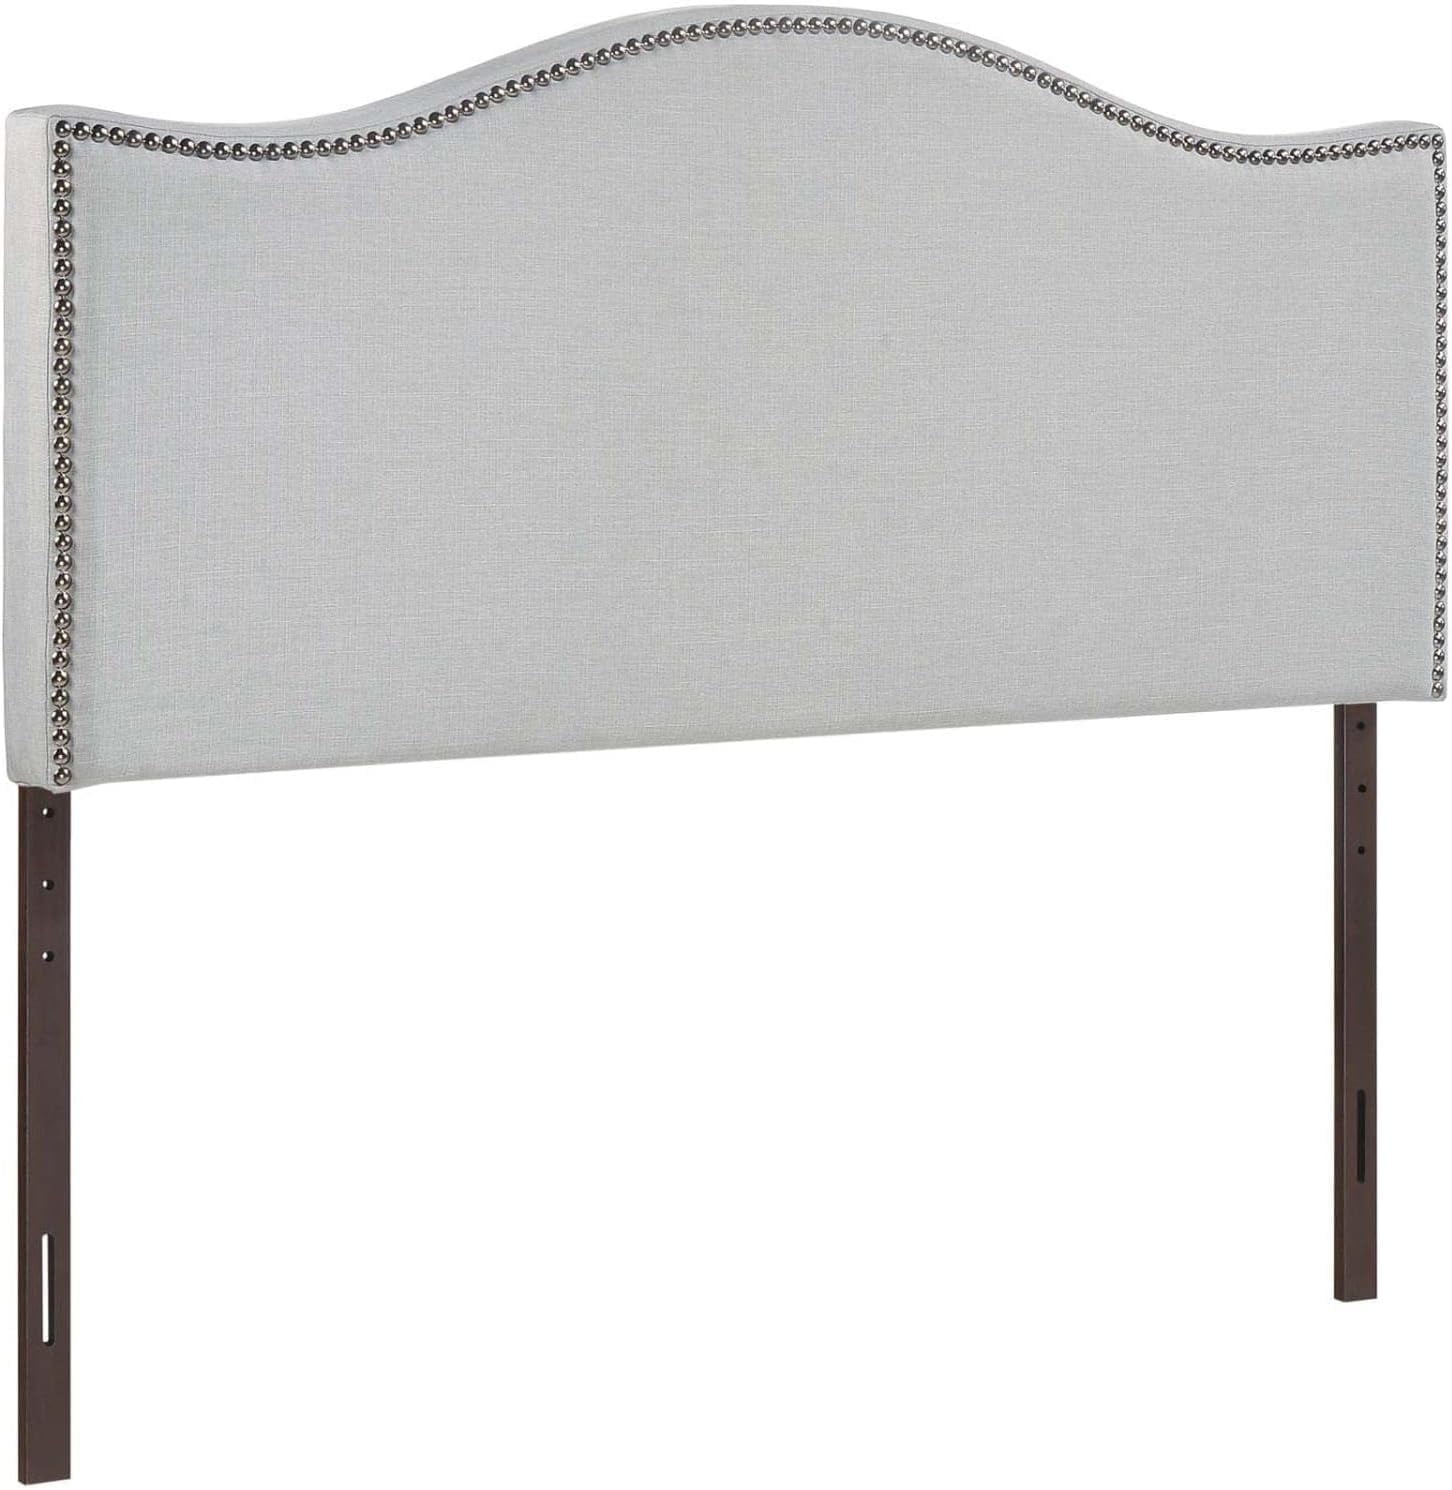 Linen Fabric Upholstered King Headboard With Nailhead Trim And Curved ...